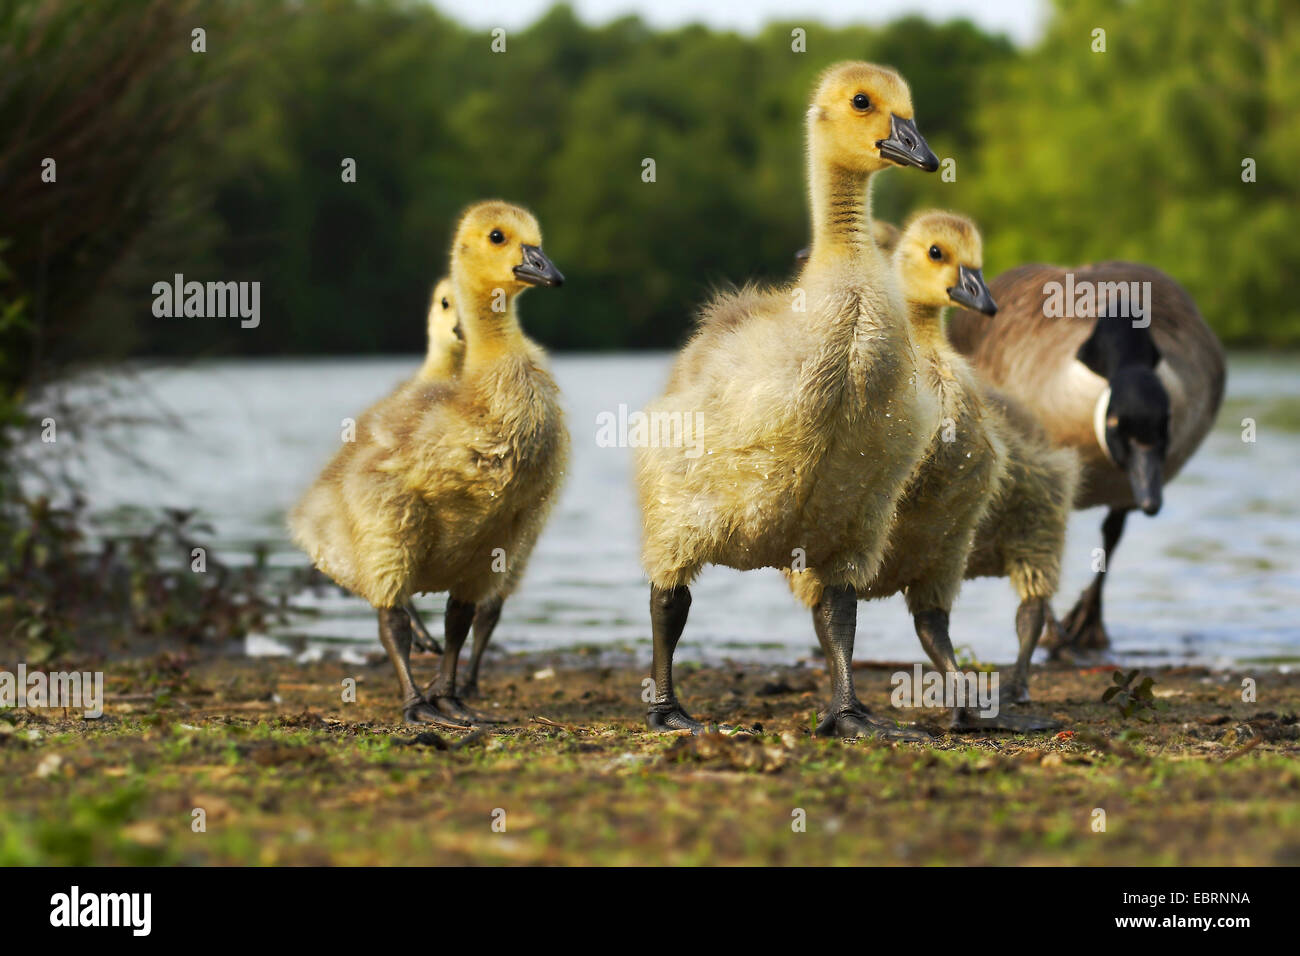 Canada goose (Branta canadensis), young geese with mother, Germany, North Rhine-Westphalia Stock Photo